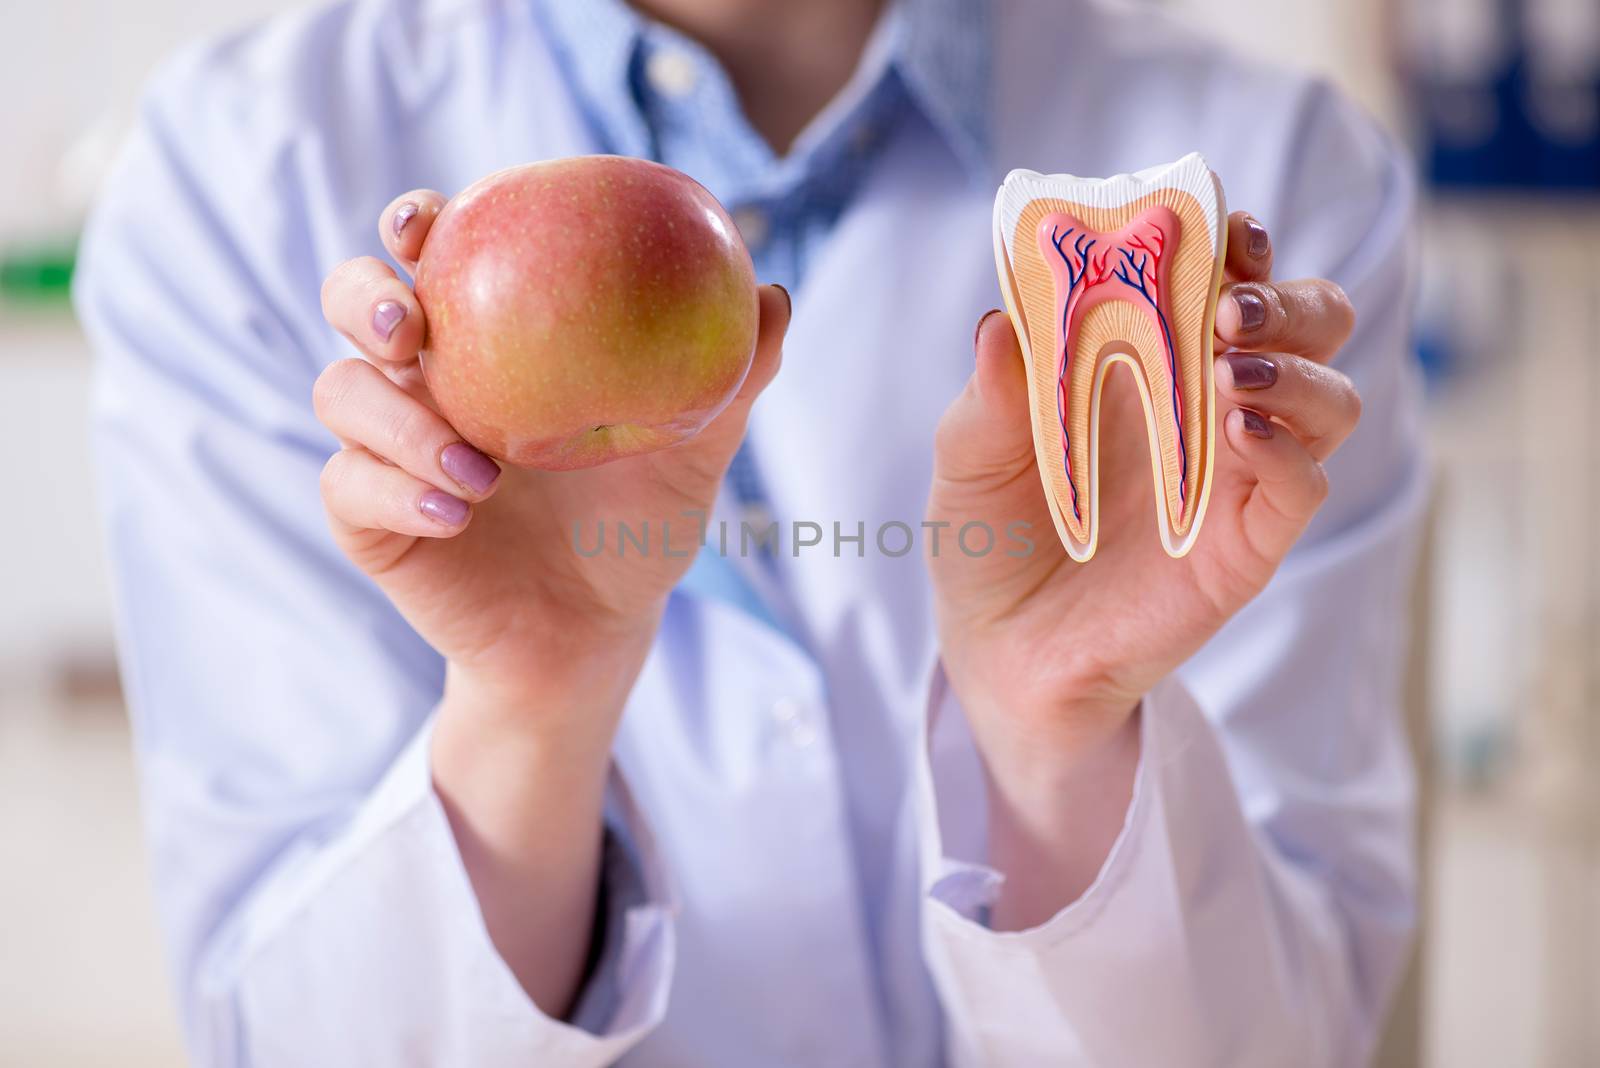 Dentist practicing work on tooth model